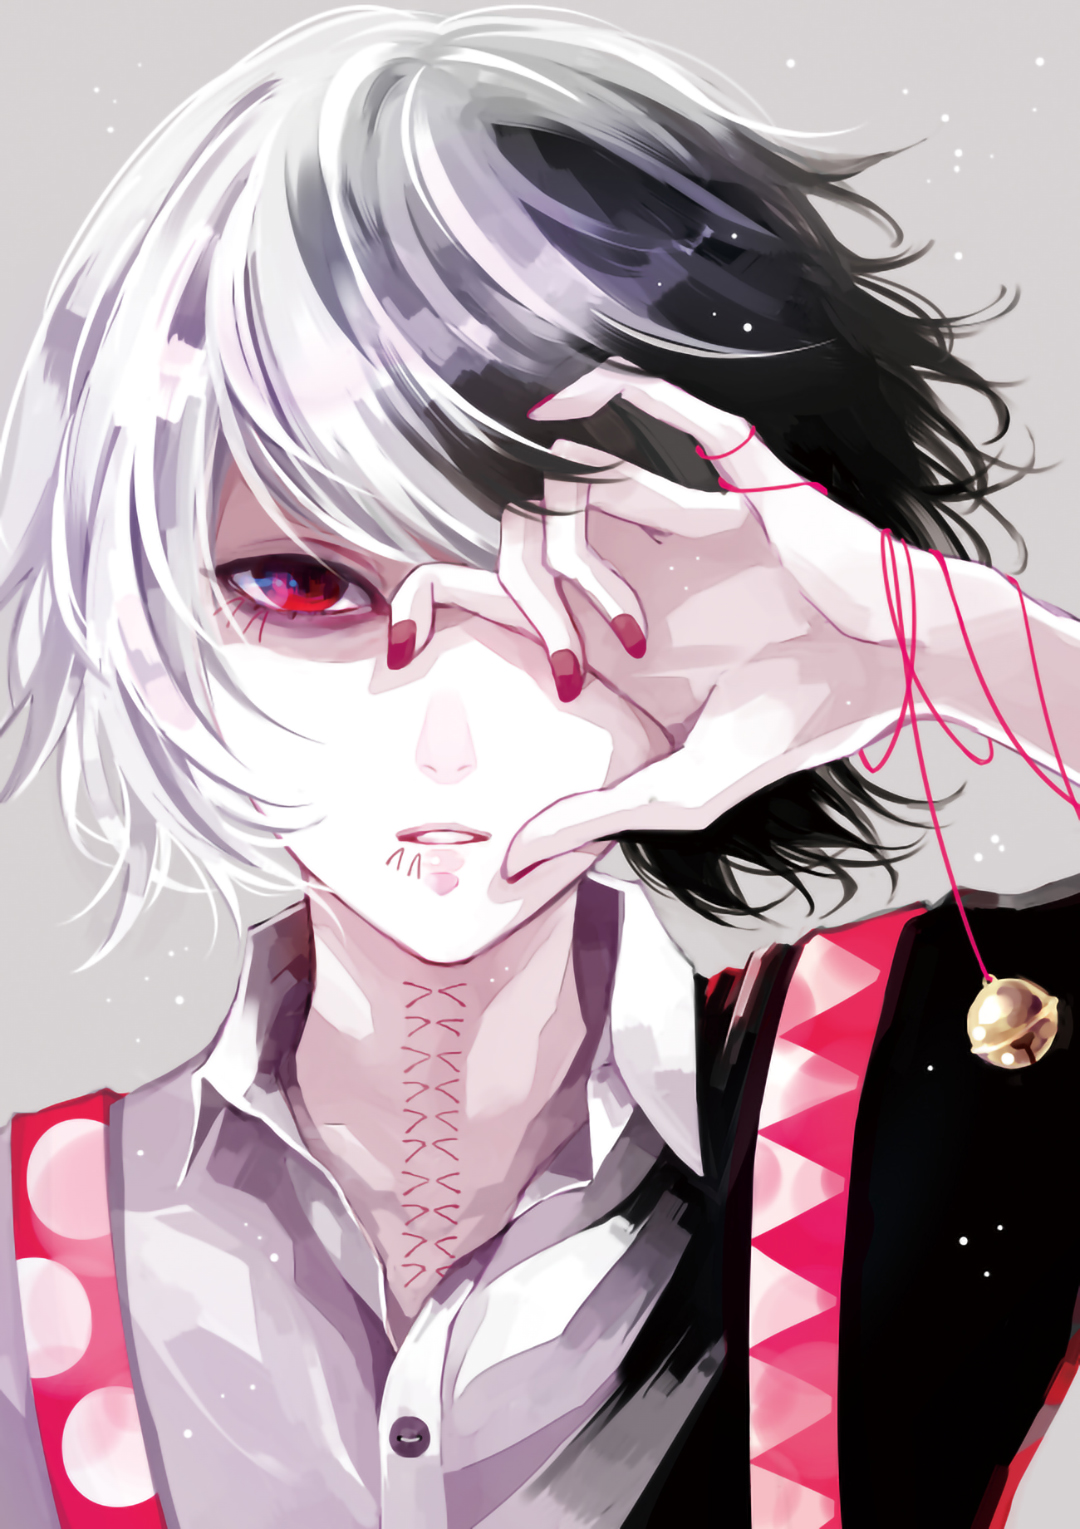 Anime Tokyo Ghoul Art by ラビ